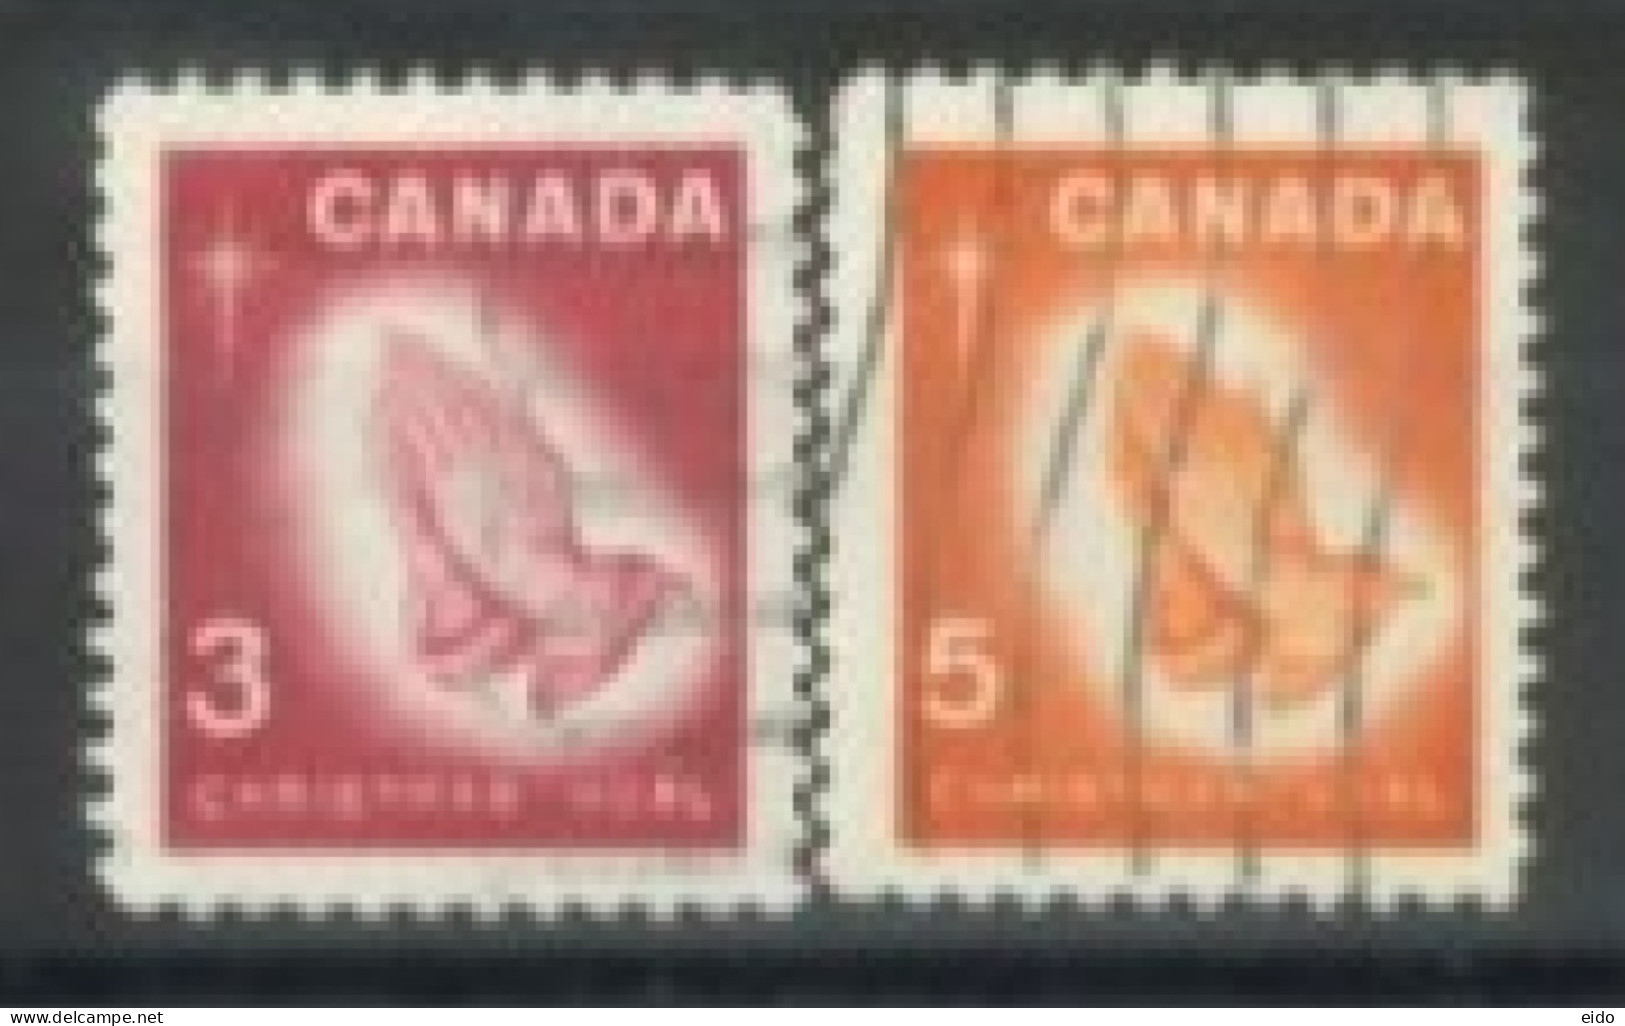 CANADA - 1966, CHRISTMAS STAMPS COMPLETE SET OF 2, USED. - Used Stamps